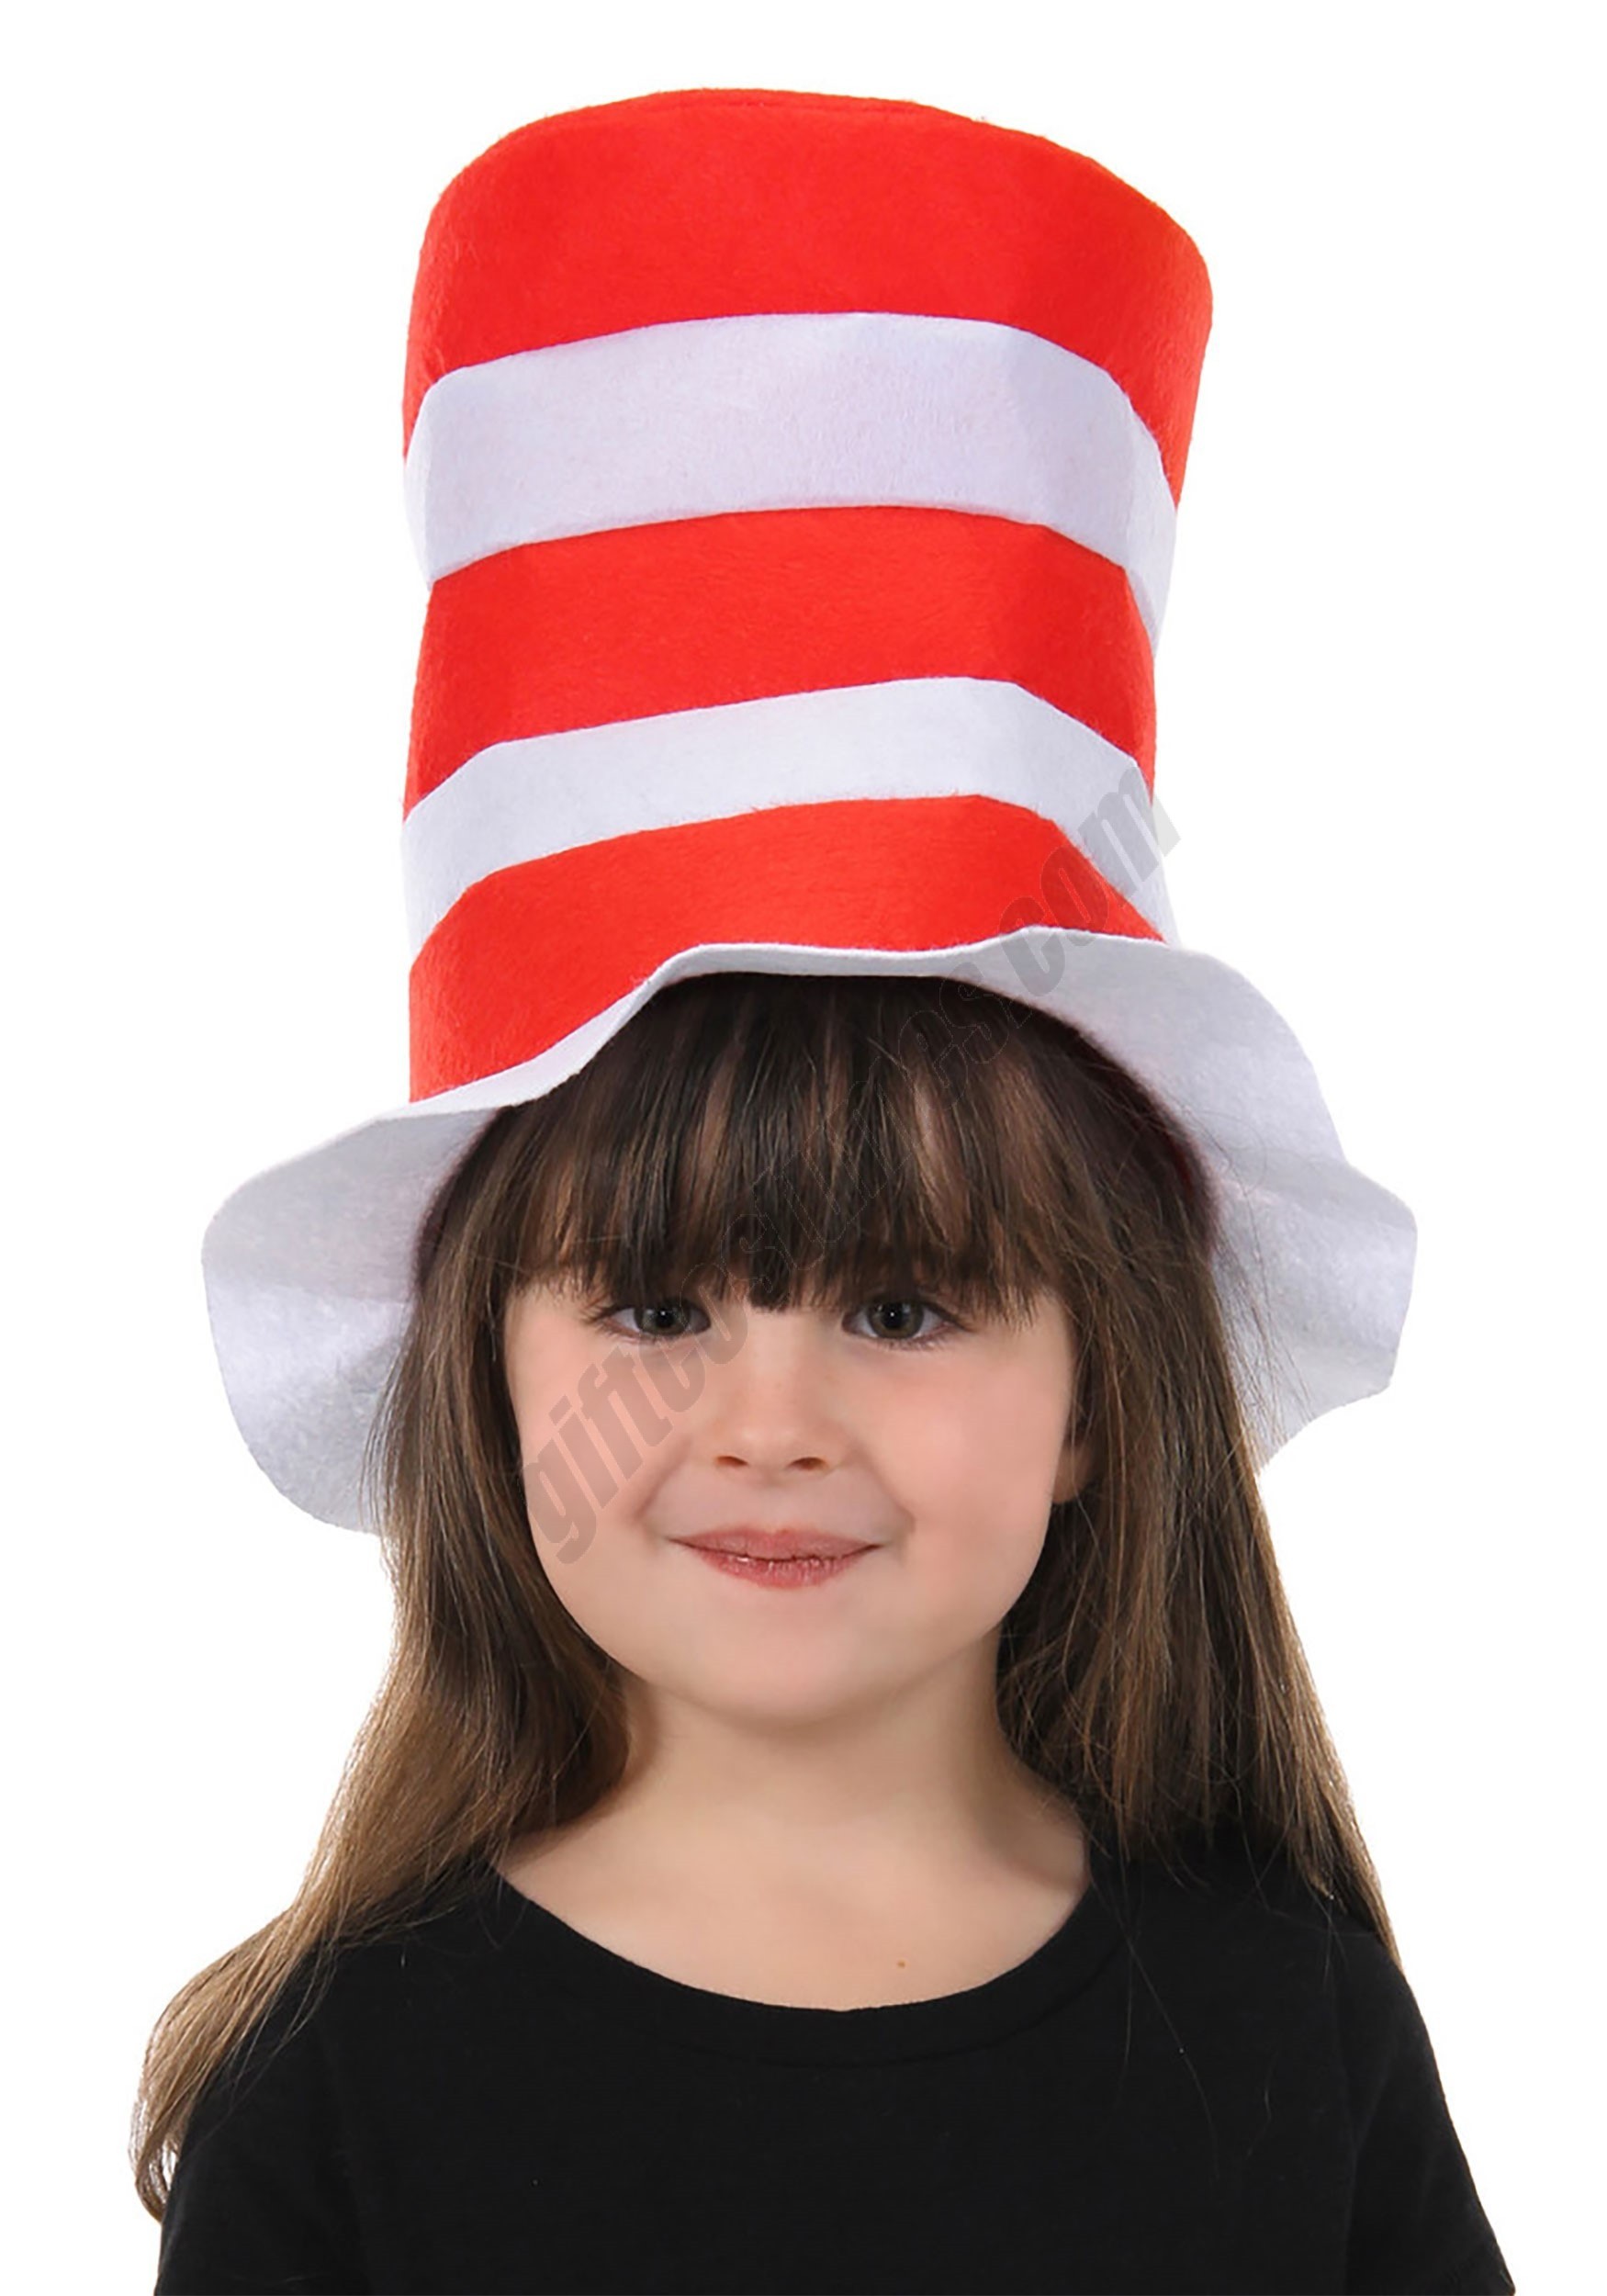 The Cat in the Hat Felt Stovepipe for Kids Promotions - The Cat in the Hat Felt Stovepipe for Kids Promotions